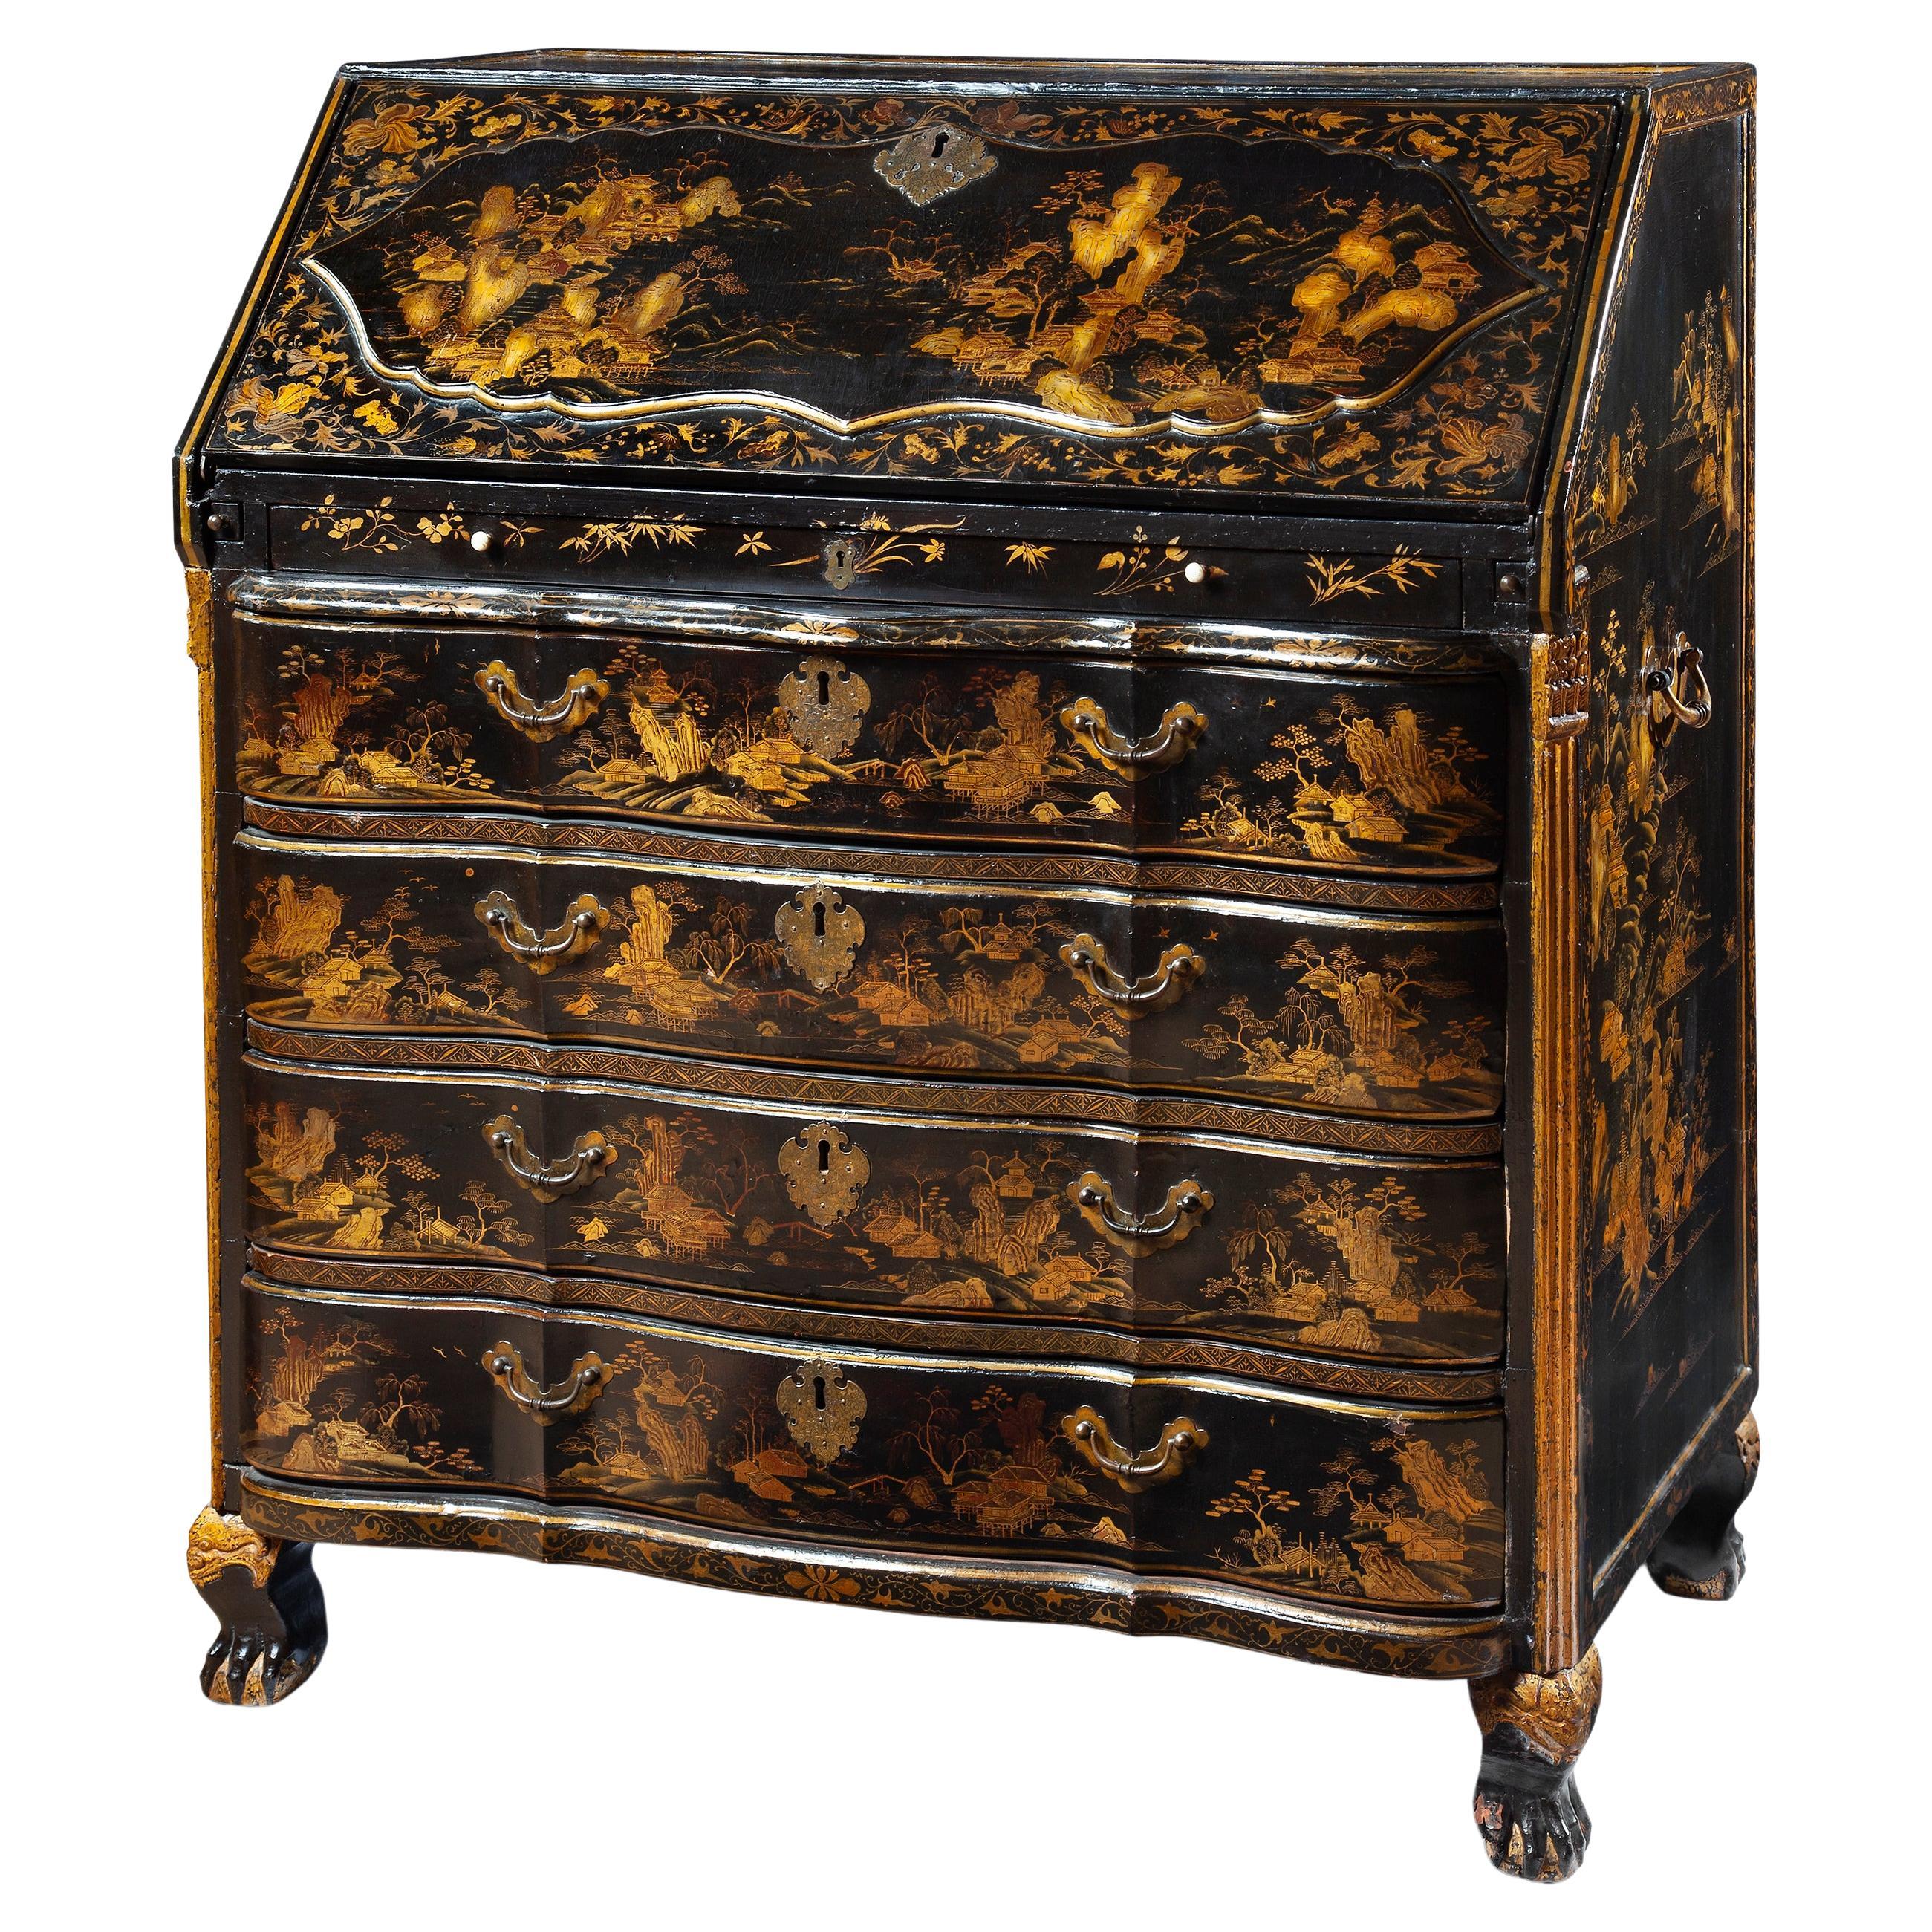 18th Century Chinese Export Lacquer Chinoiserie Bureau Desk for the Dutch Market For Sale